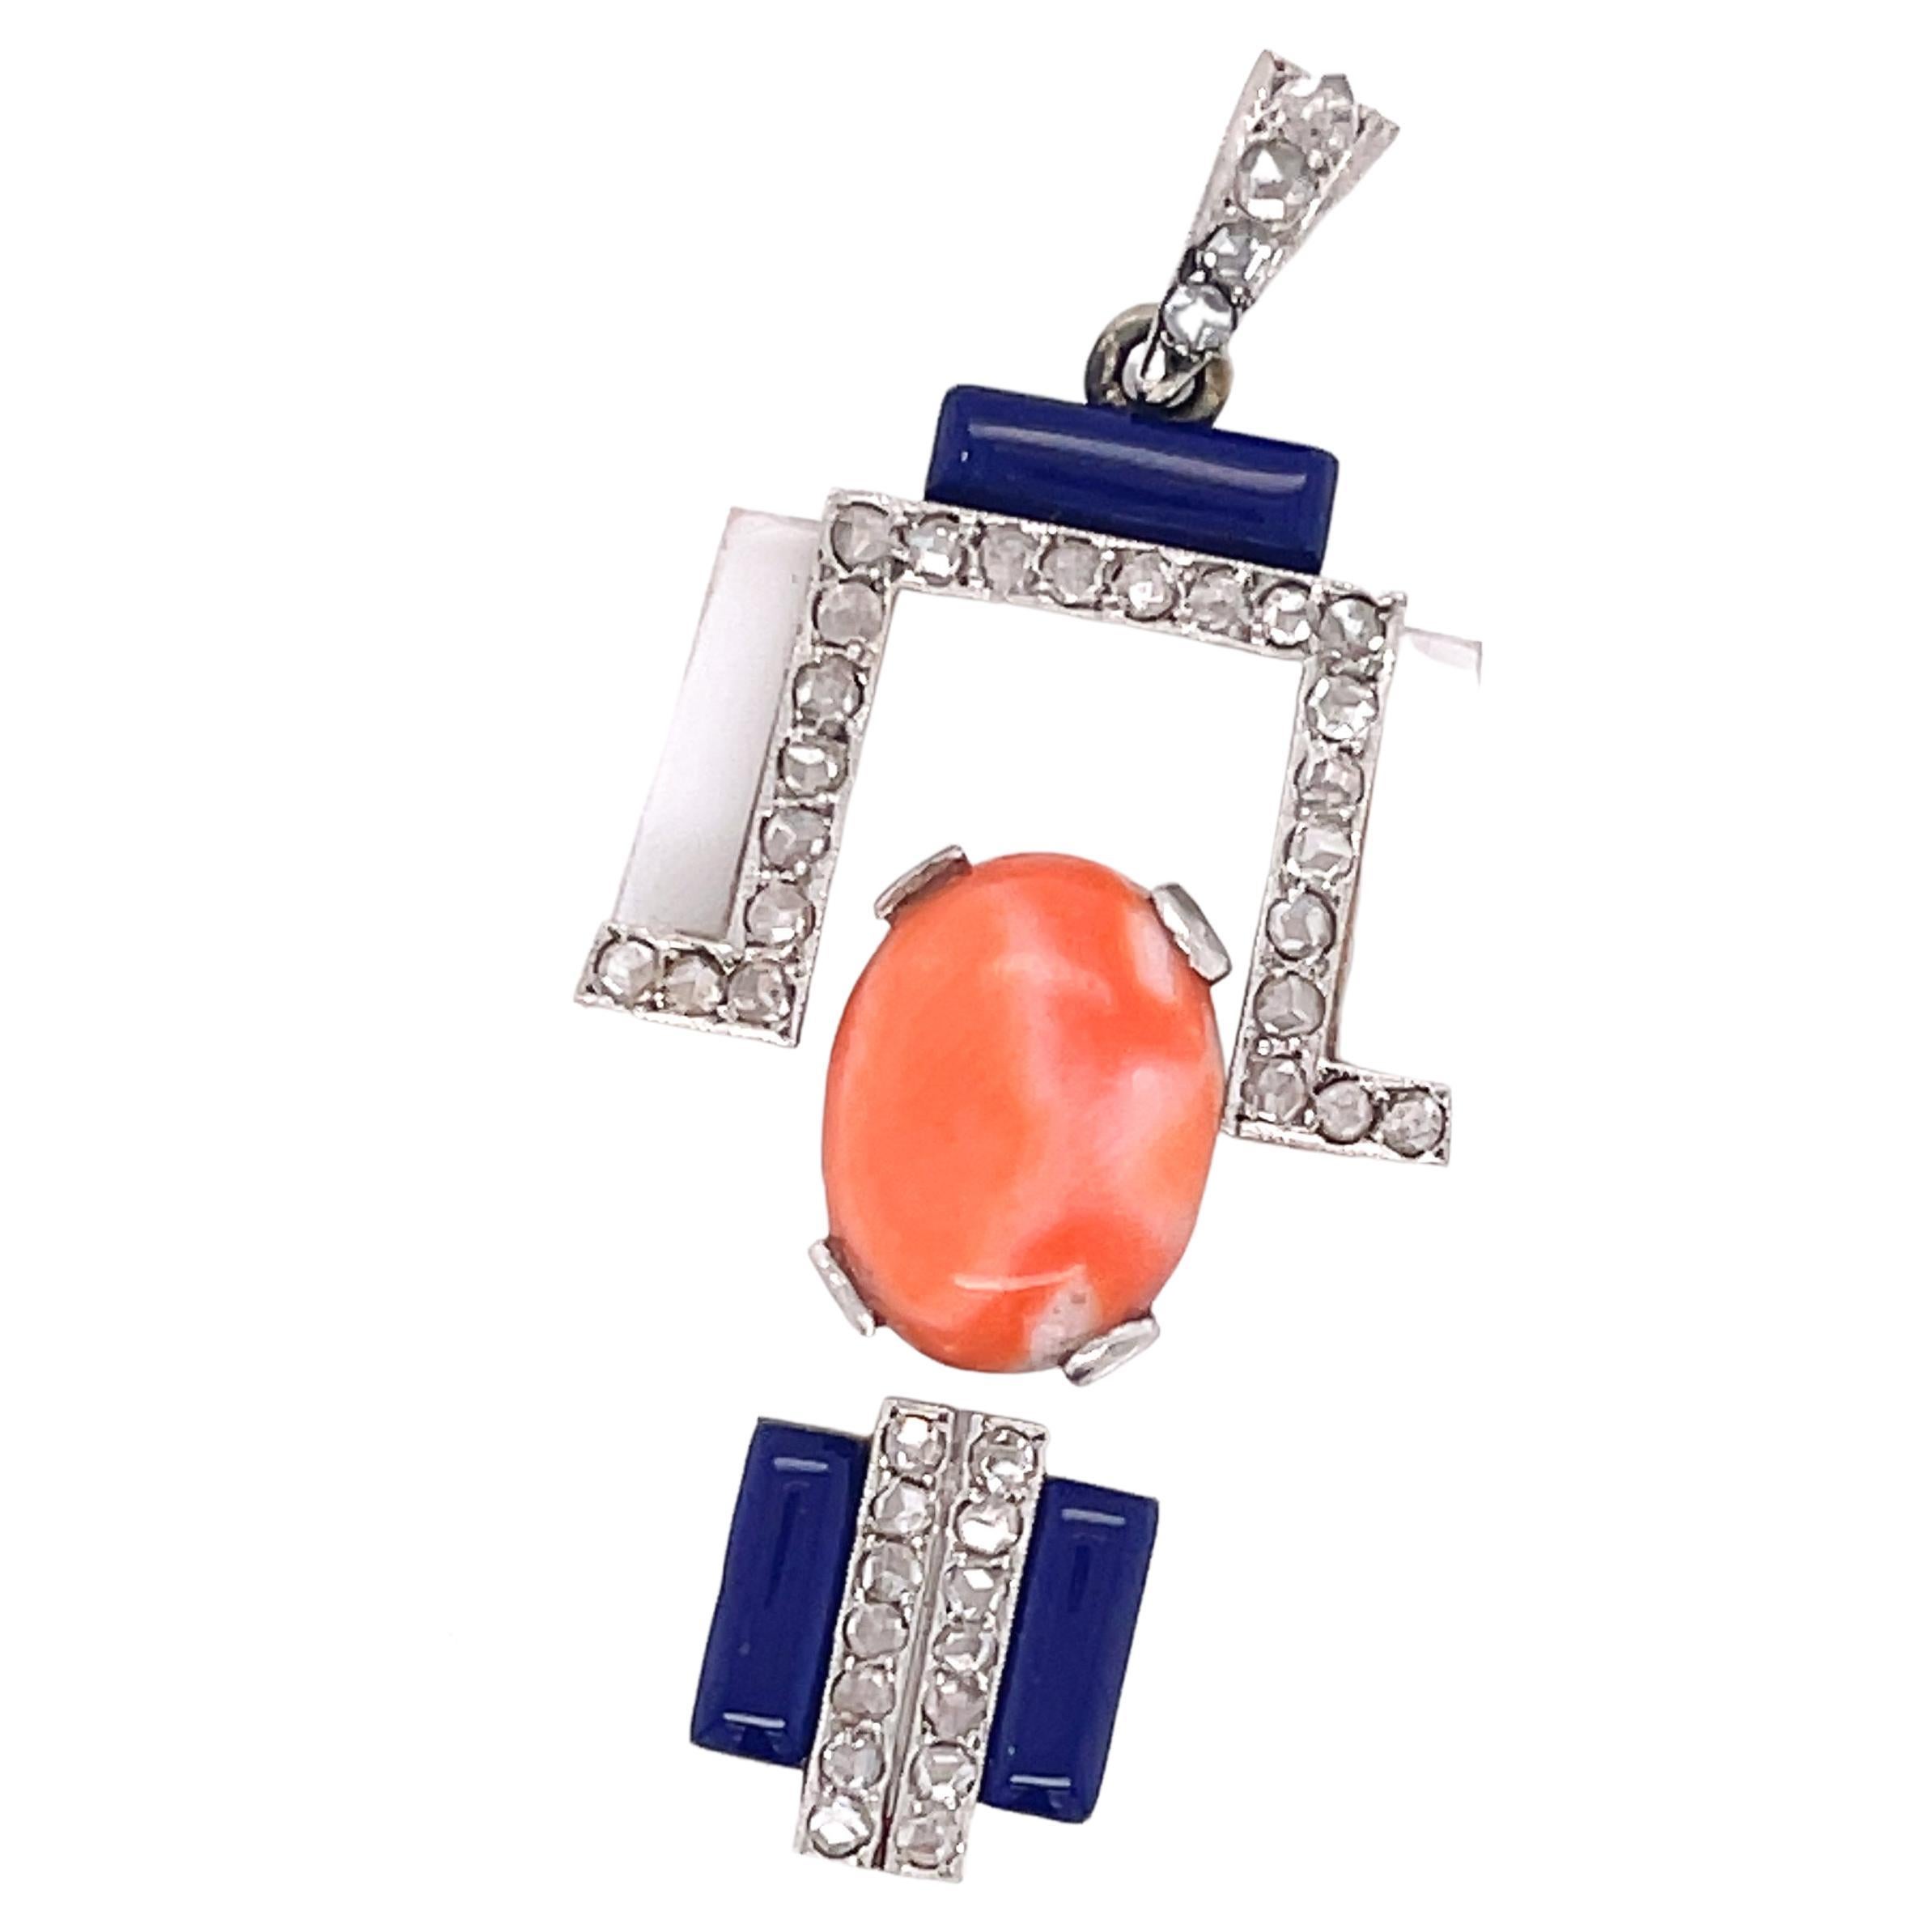  Unique trapezoid transparent Rock Quartz necklace pendant. The center has an orange coral oval. Blue enamel accents the top of the pendant and two stripes on the bottom. Round cut diamonds add to the geometric design of this pendant. 

• 18k Gold
•